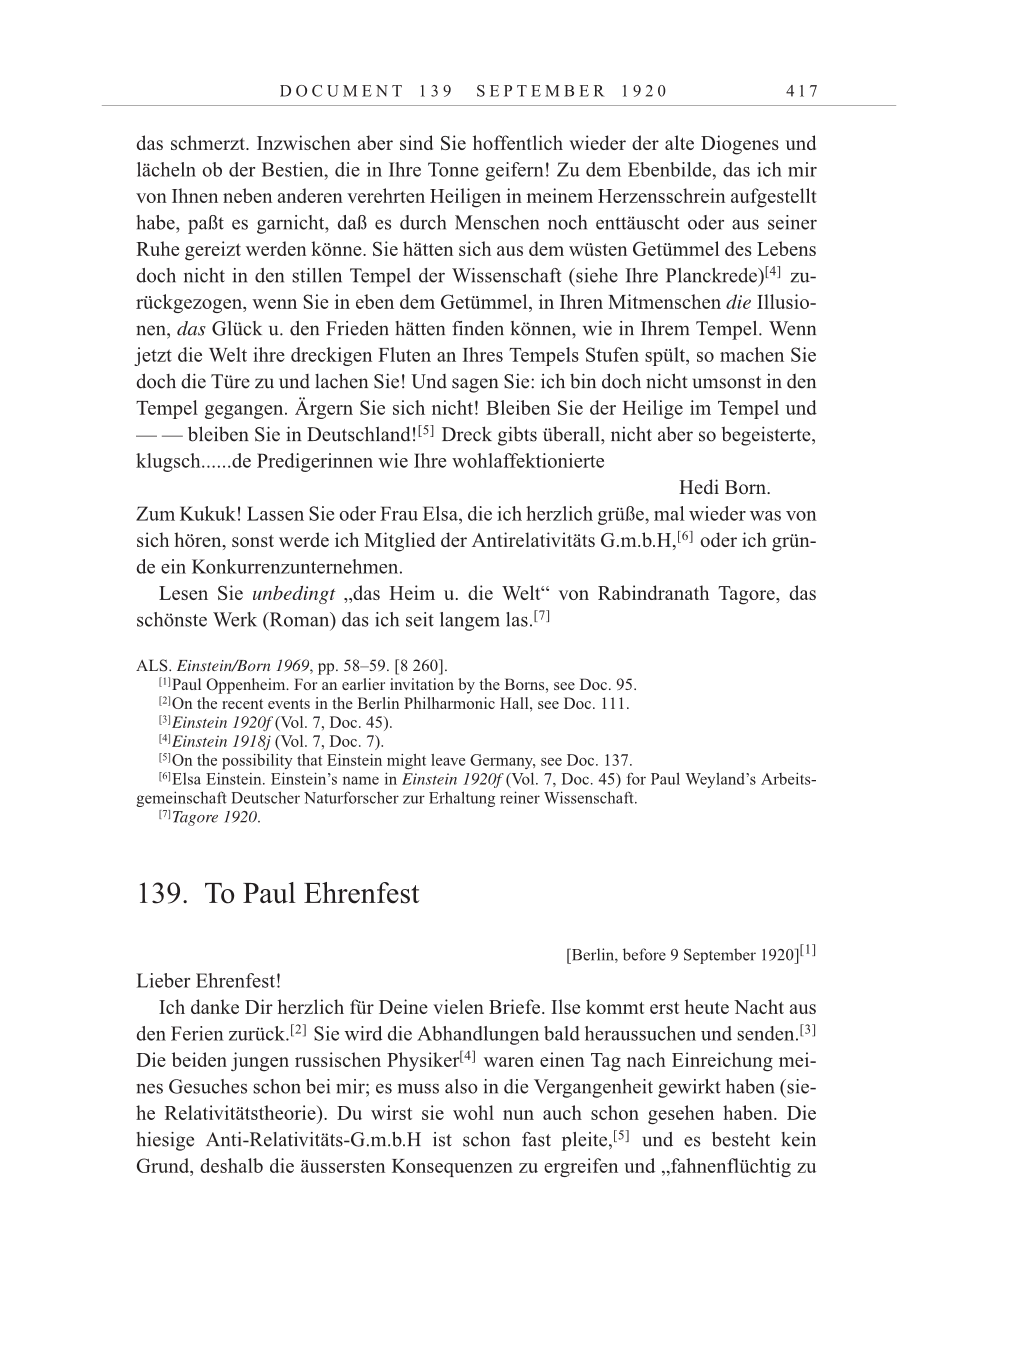 Volume 10: The Berlin Years: Correspondence May-December 1920 / Supplementary Correspondence 1909-1920 page 417